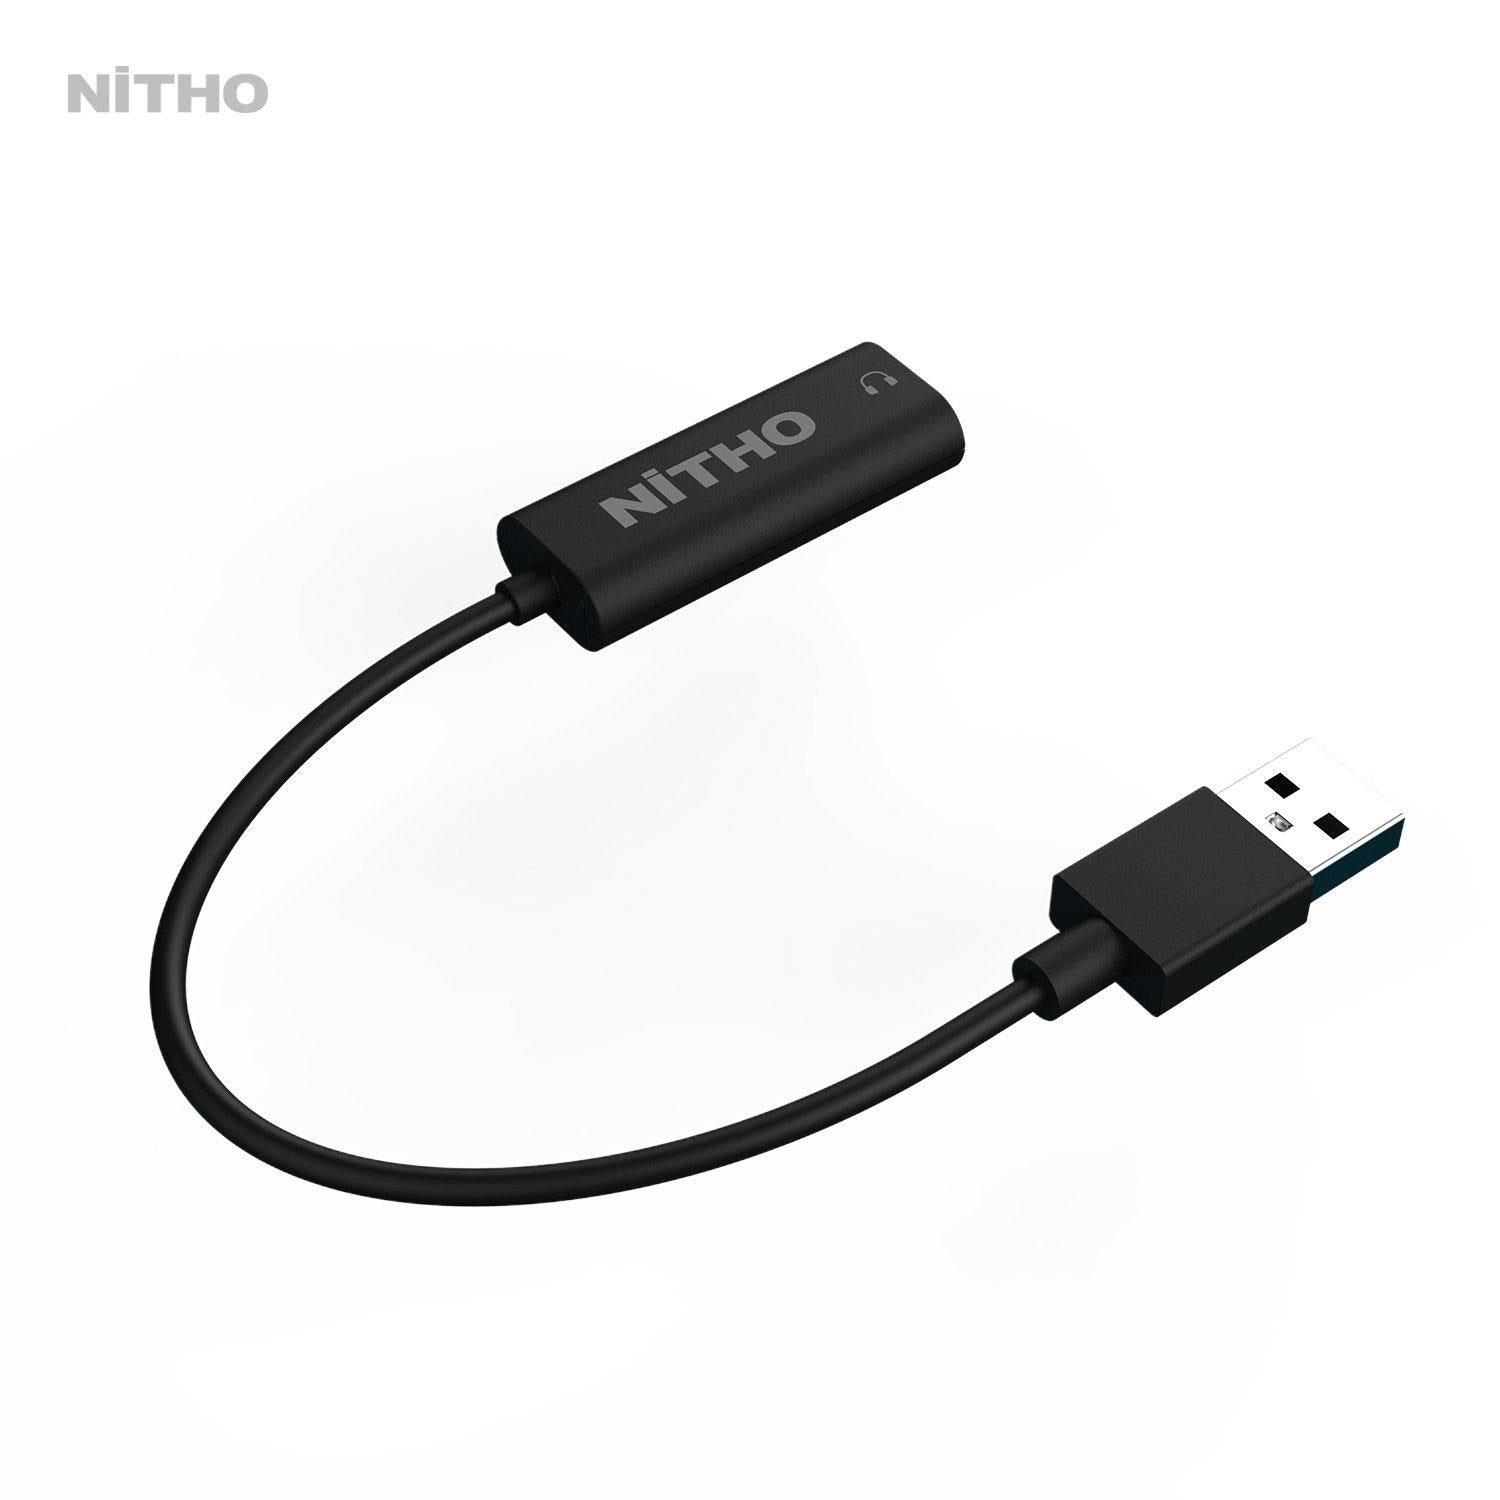 7.1 Surround Sound Adapter (with NiTHO® Audio Center software Windows®10)